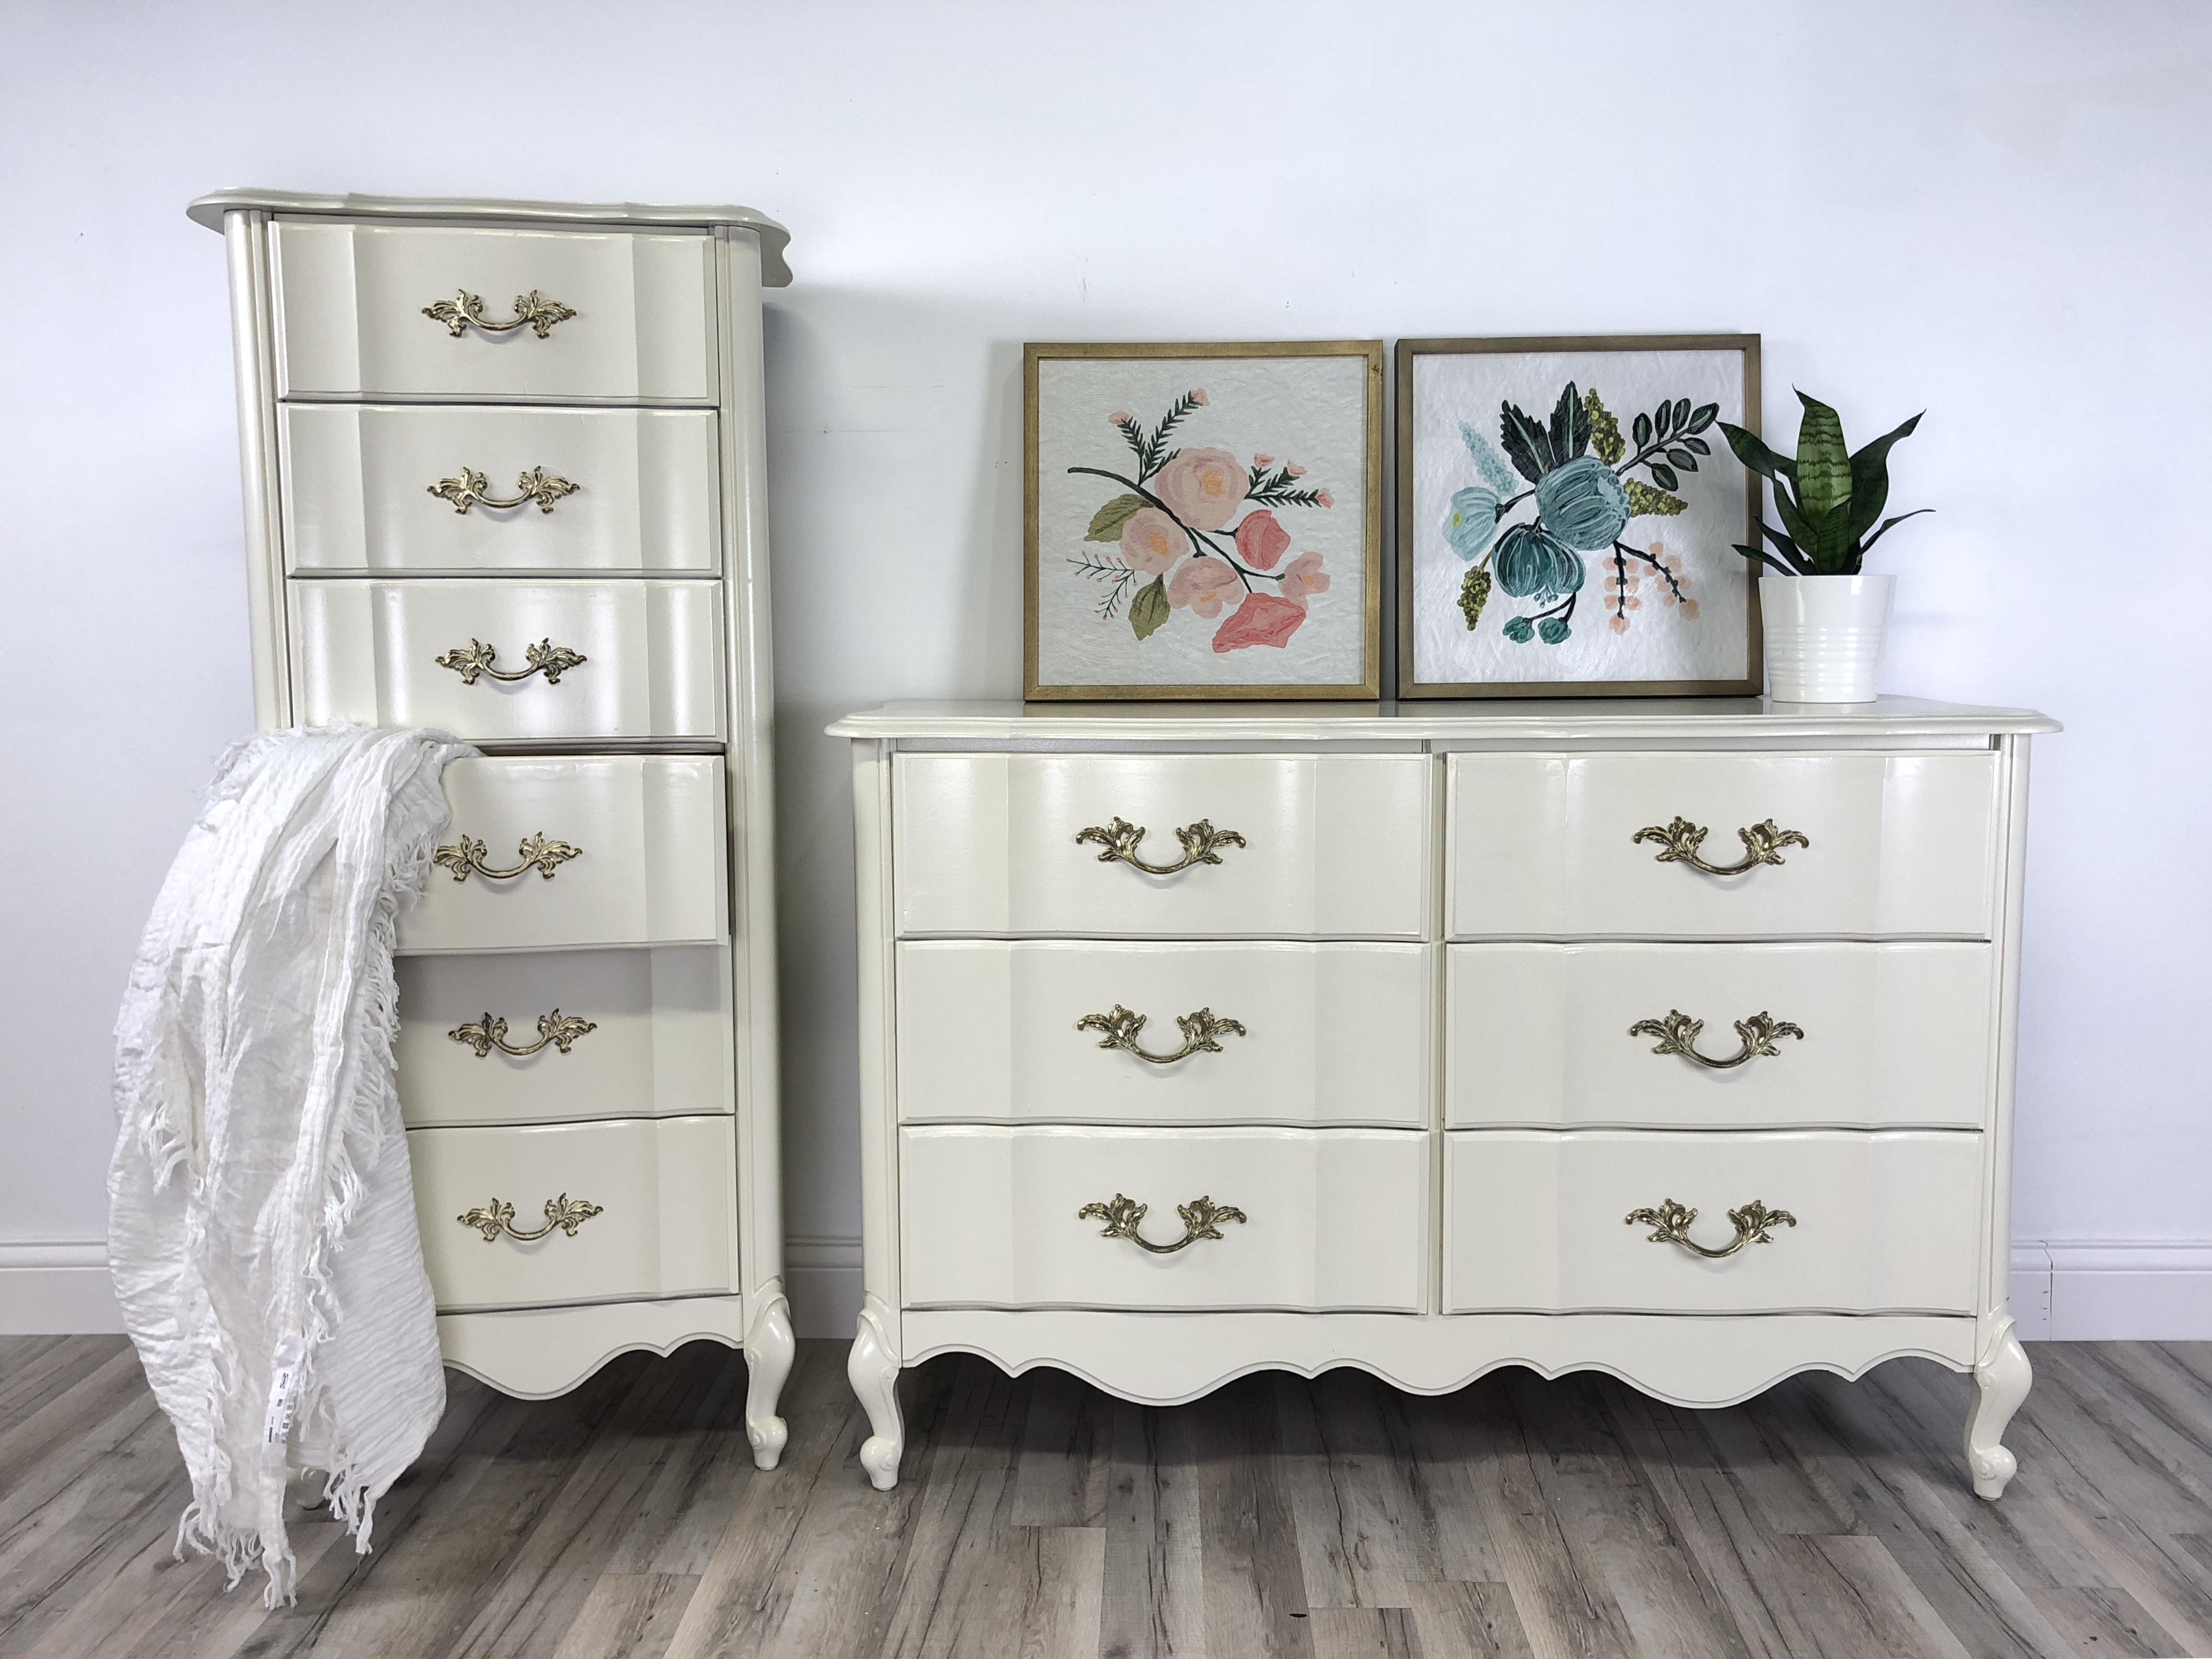 refurbished french provincial style bedroom furniture suite